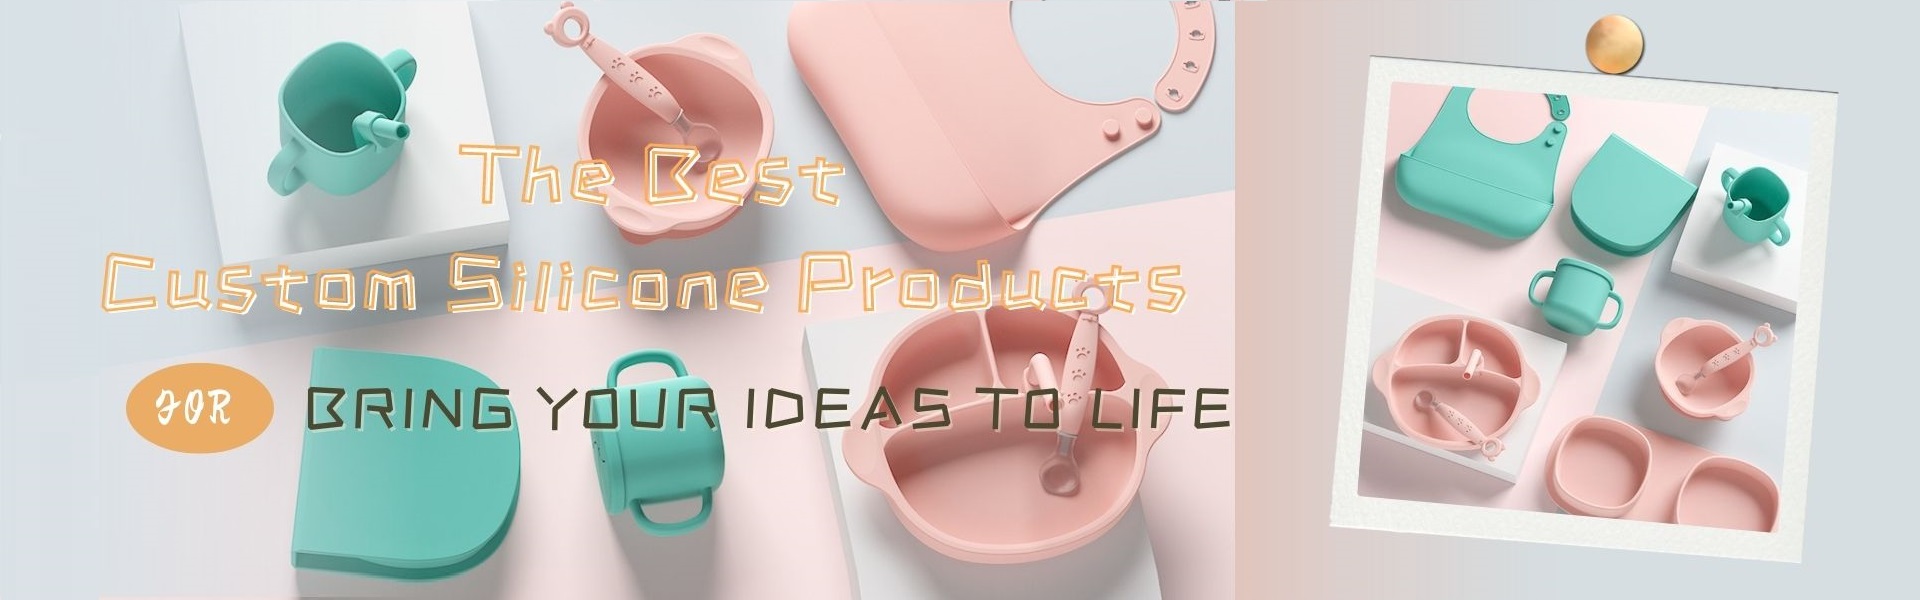 The Best Custom Silicone Products for Bring Your Ideas to Life